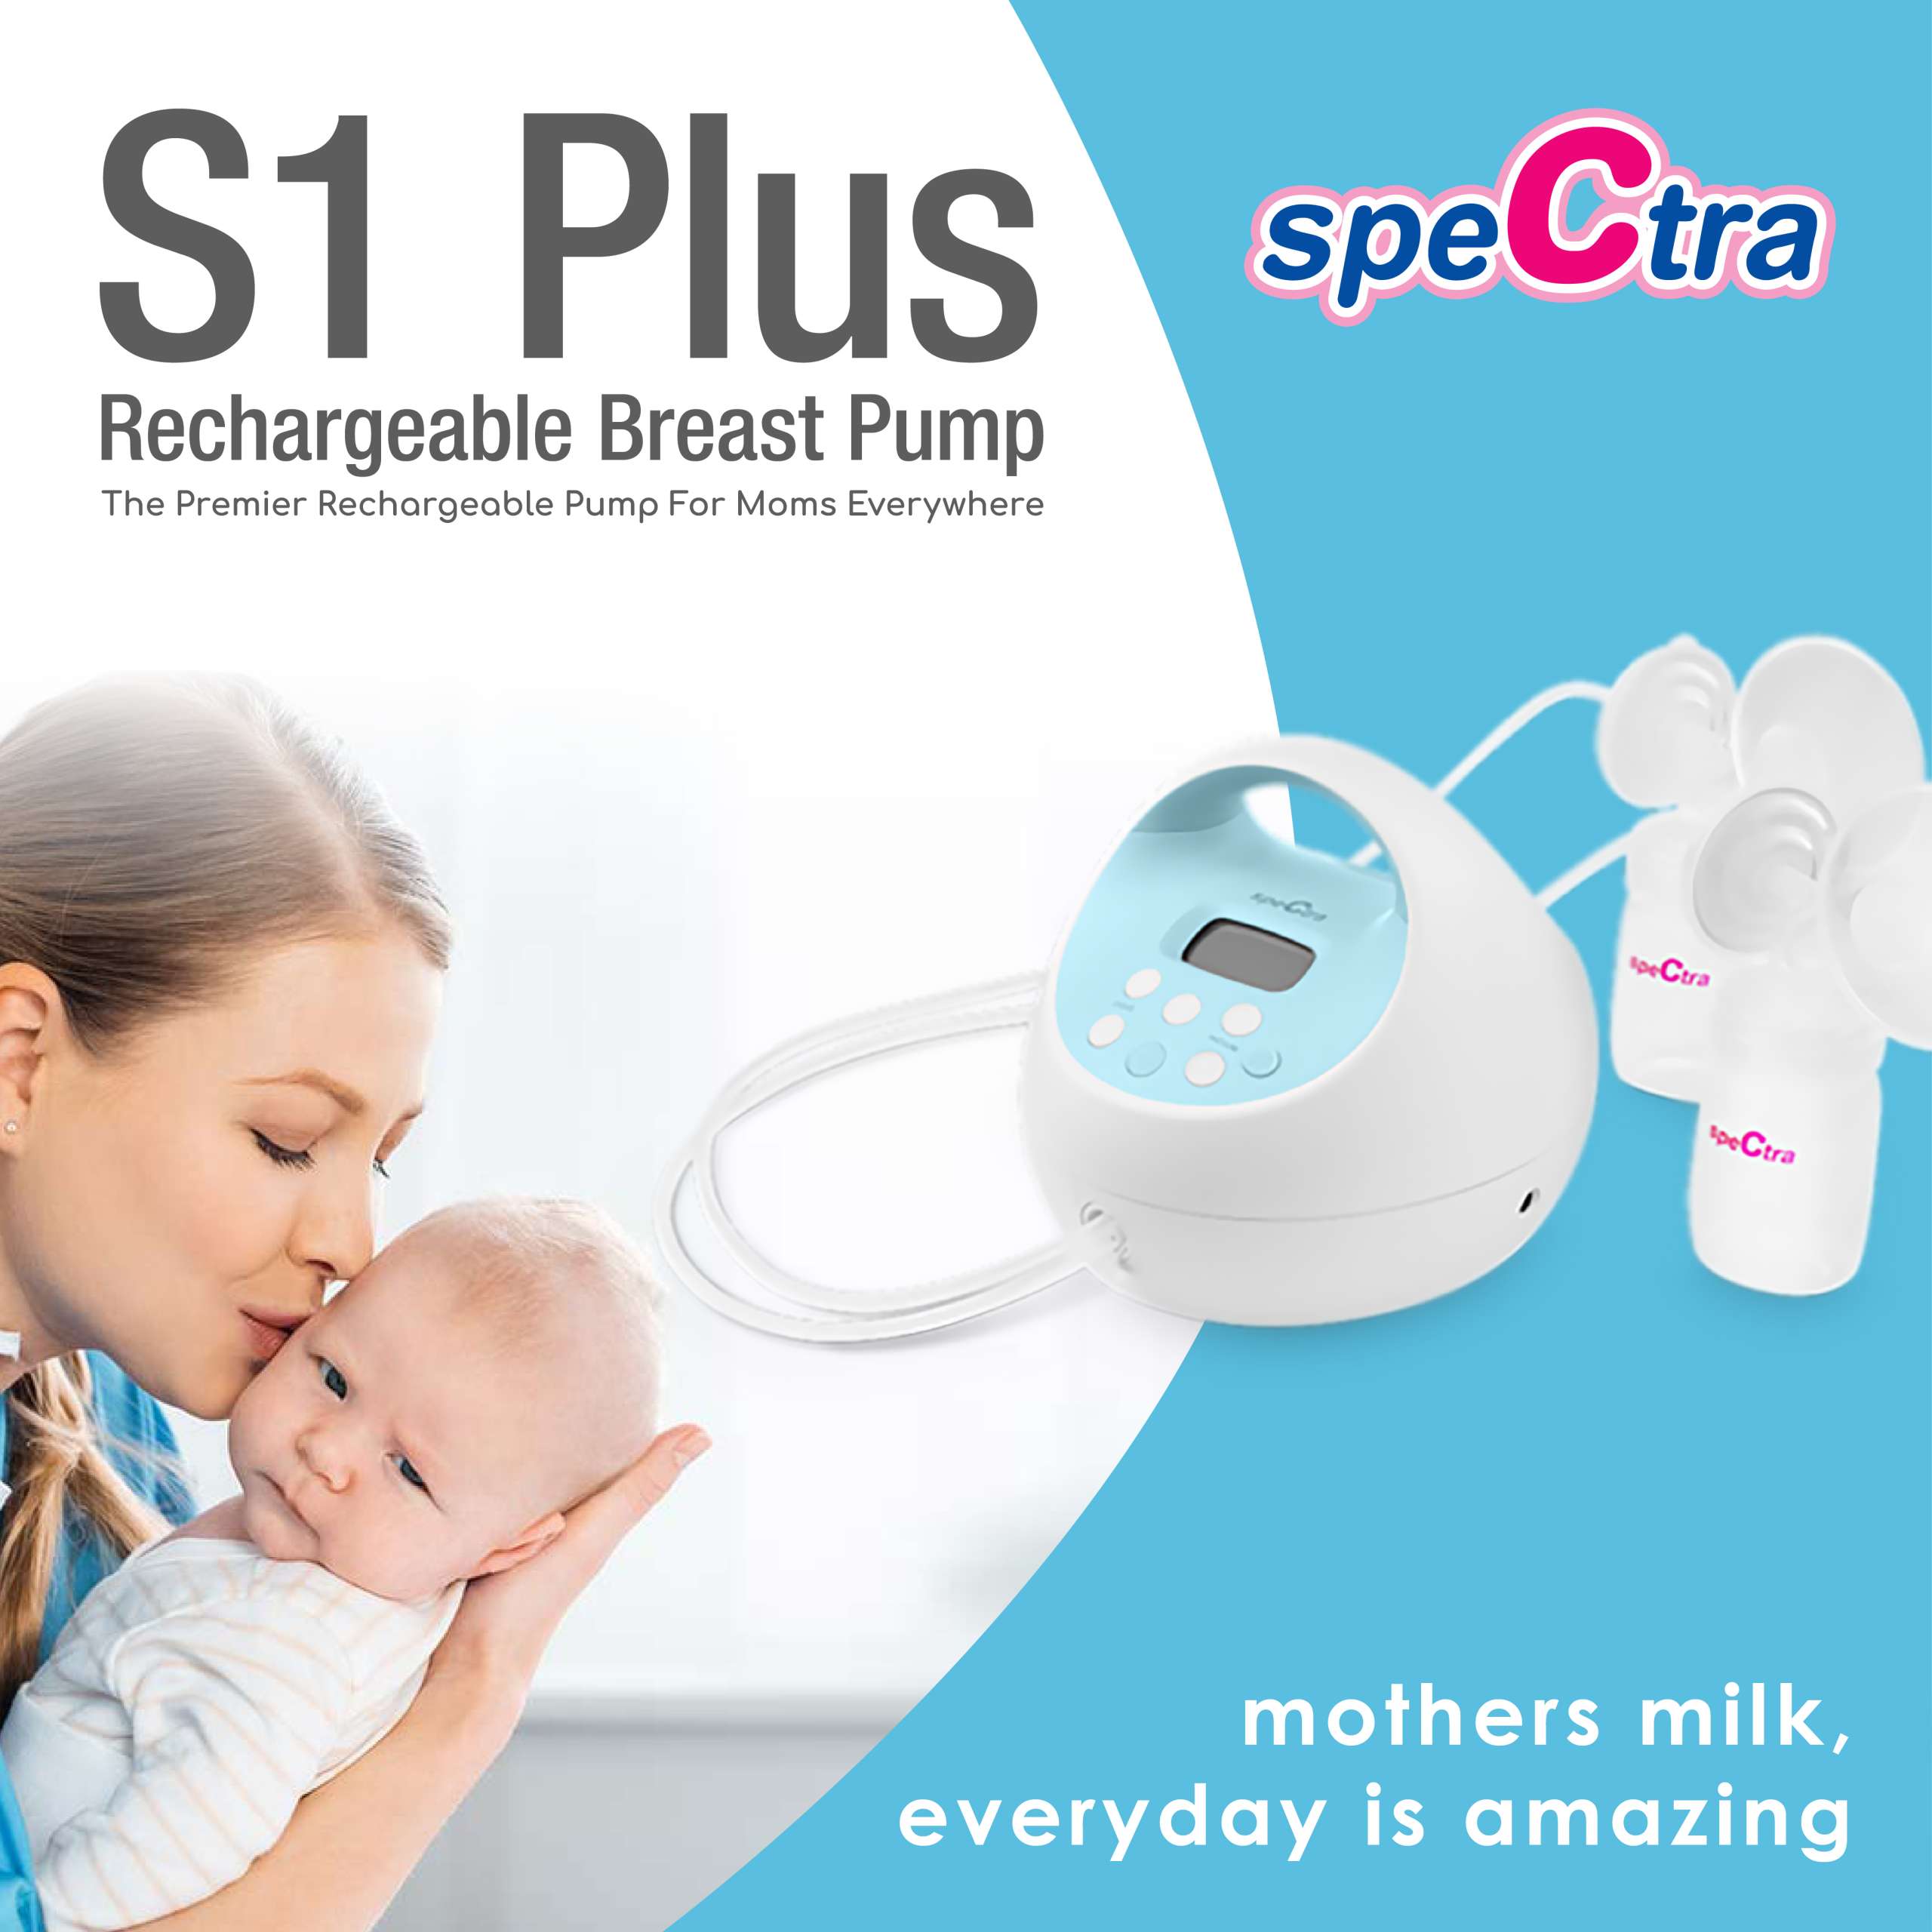 Spectra SG Portable Double Adjustable Breast Pump - Acelleron Medical  Products